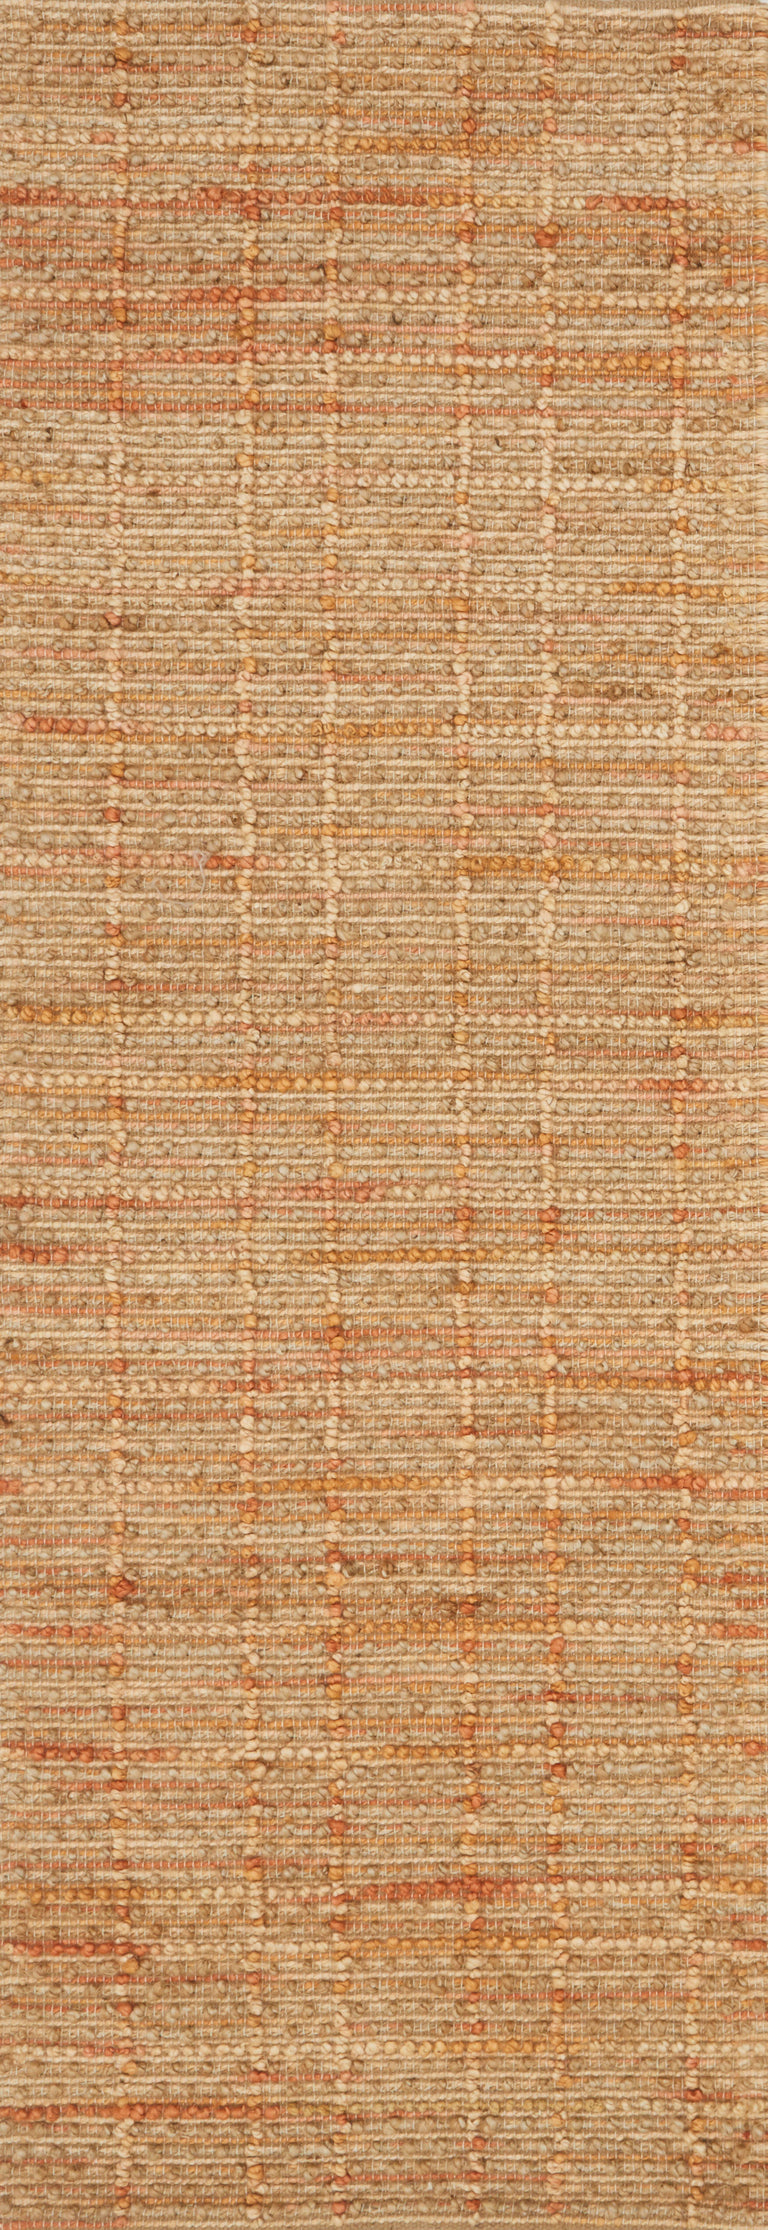 Loloi Rugs Beacon Collection Rug in Tangerine - 9'3" x 13'